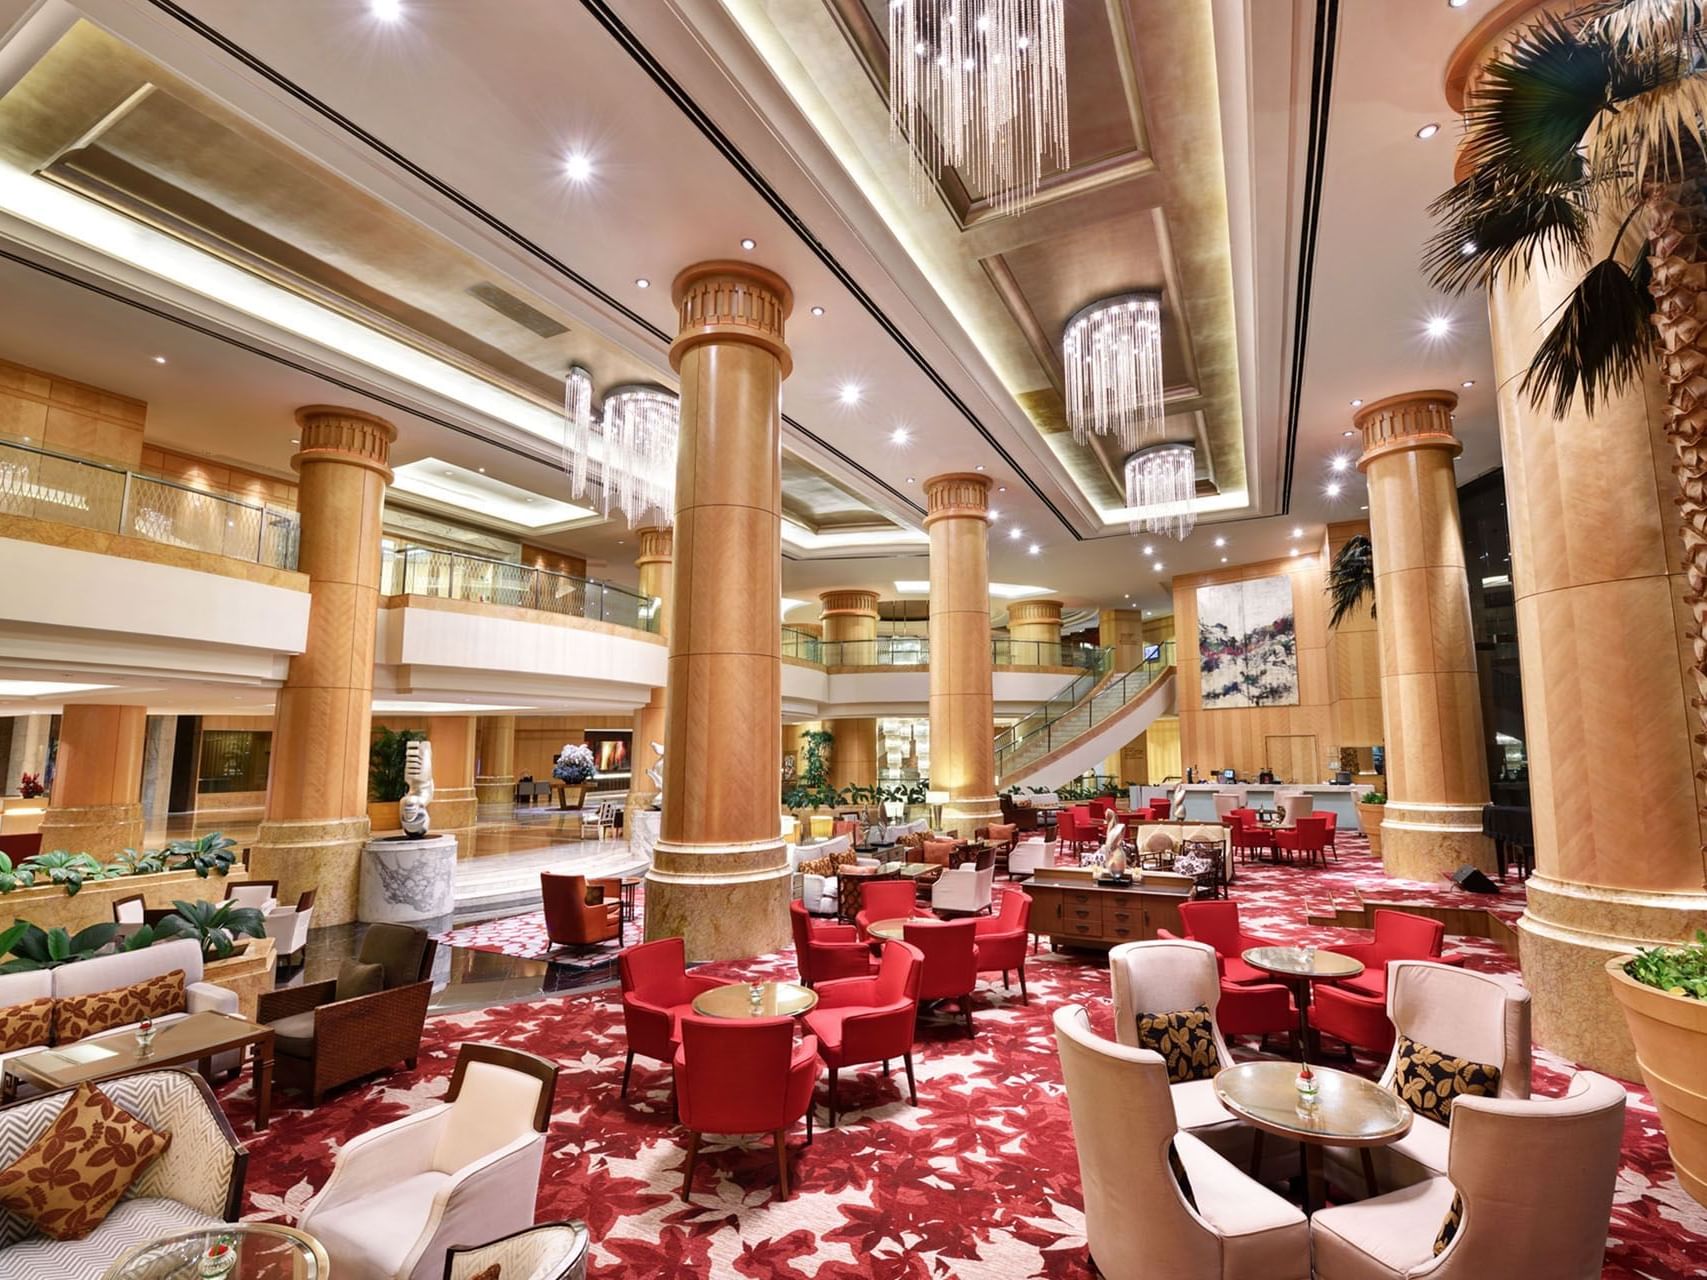 Sphere Lounge featuring white & red themed interior with large chandeliers at One World Hotel